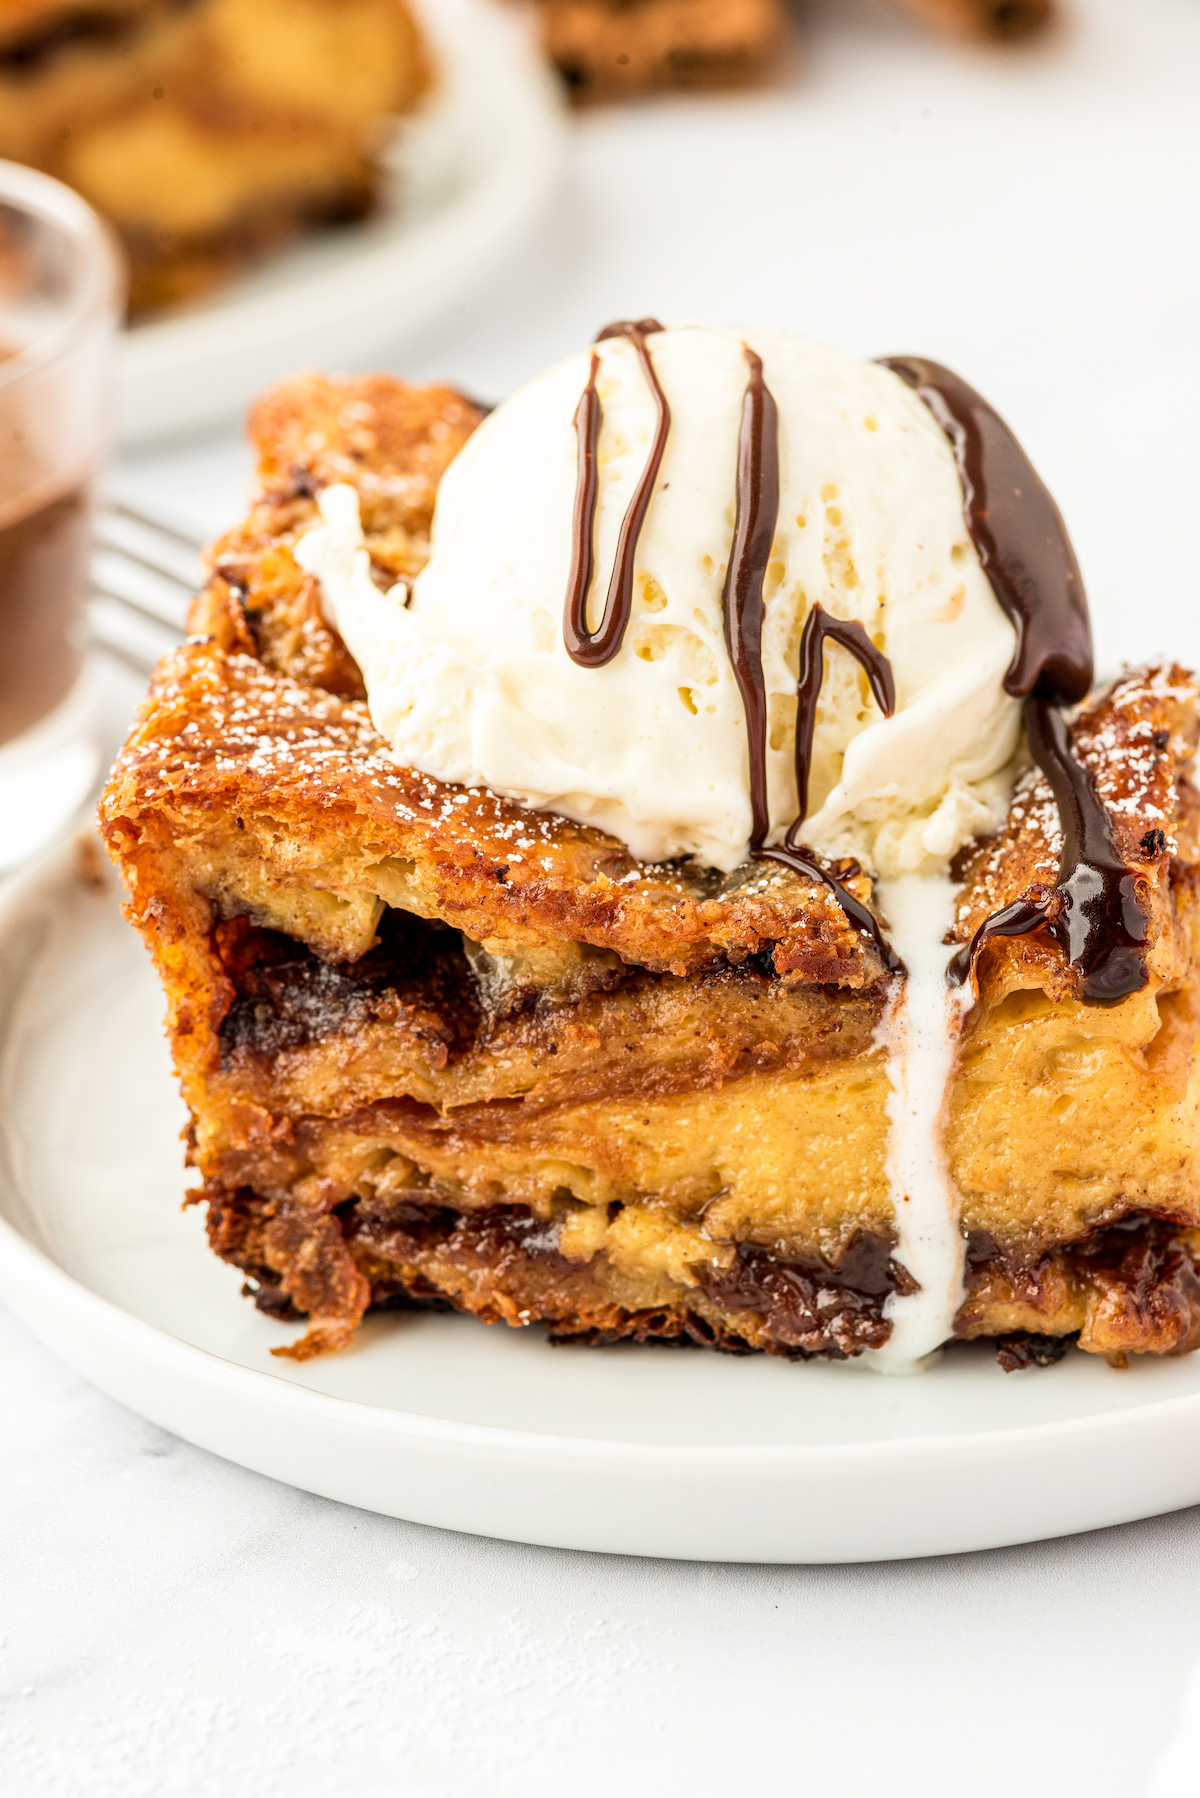 An edge piece of bread pudding with crispy sides, topped with ice cream and chocolate drizzle.